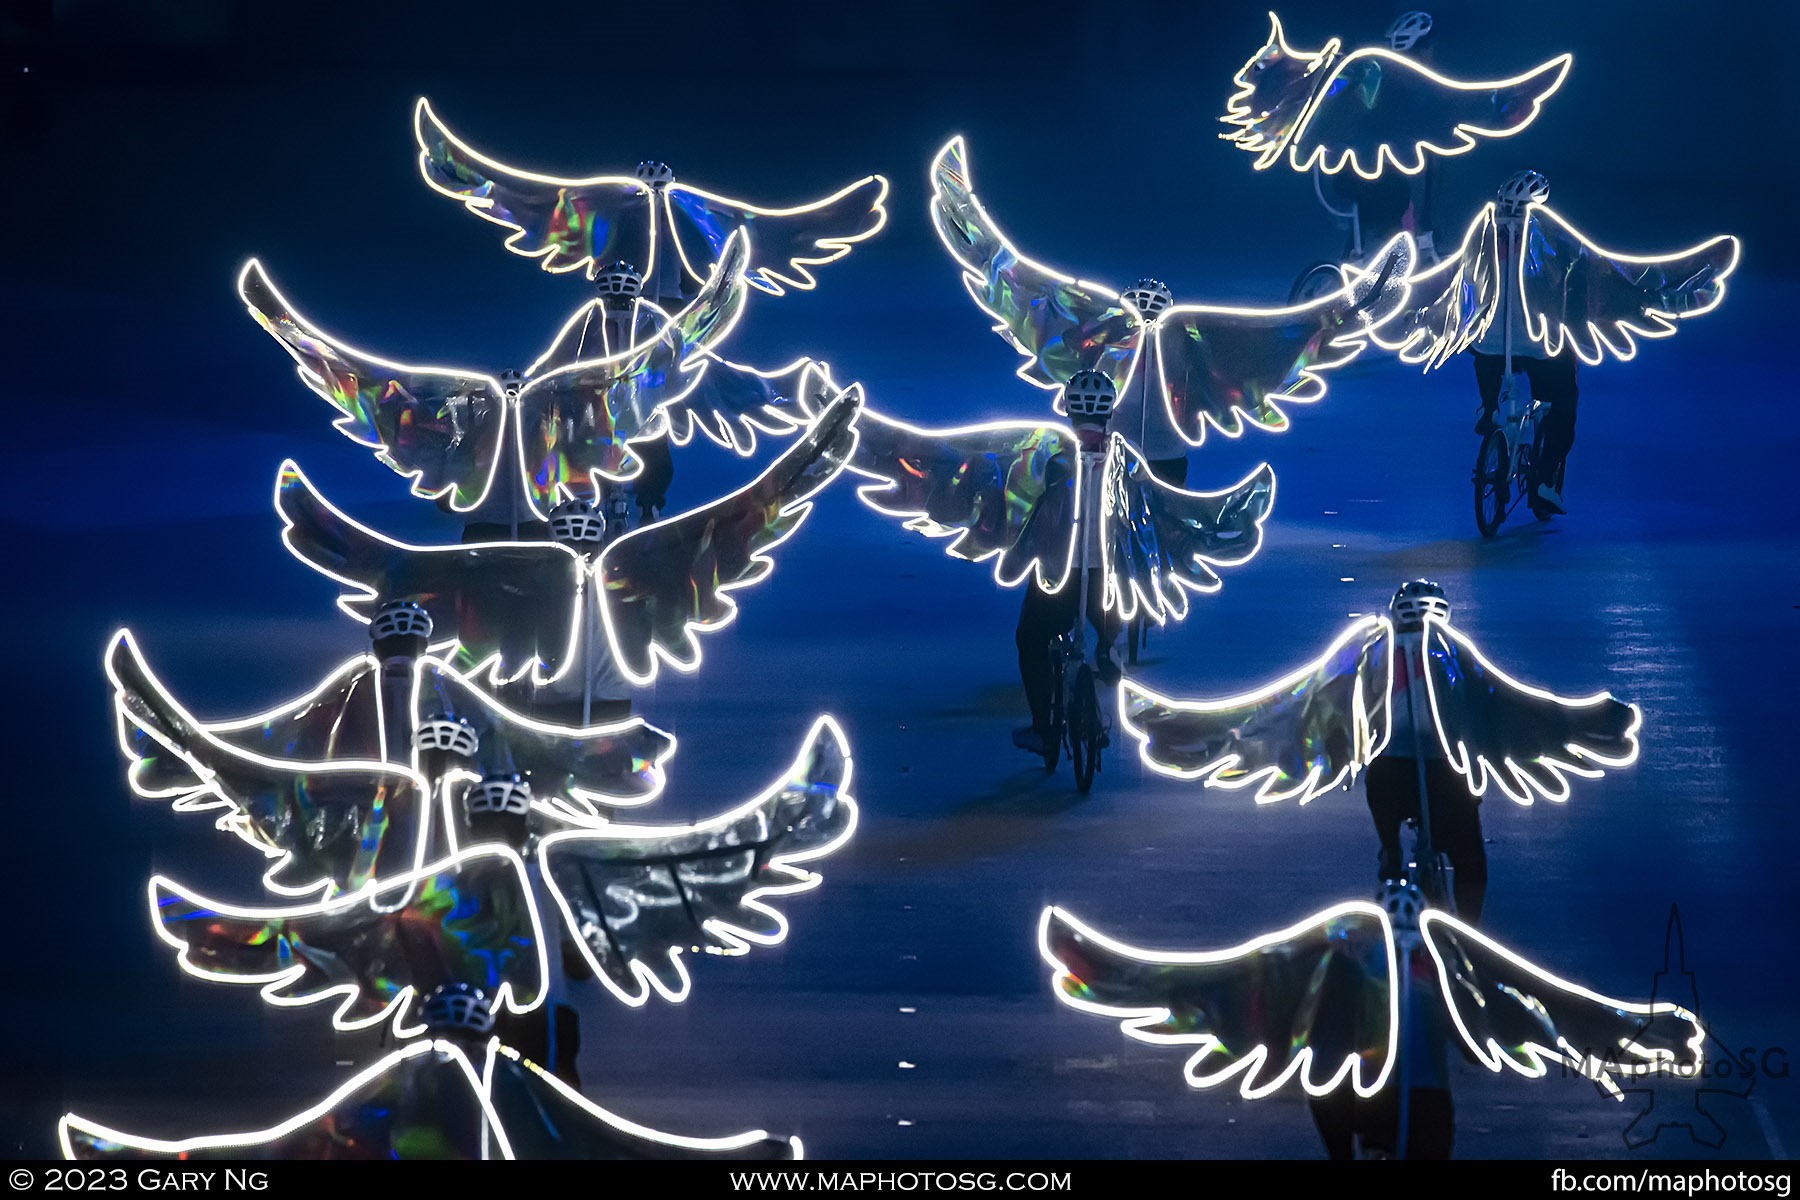 Cyclists from Team Nila Singapore with their lighted wings props portraying doves